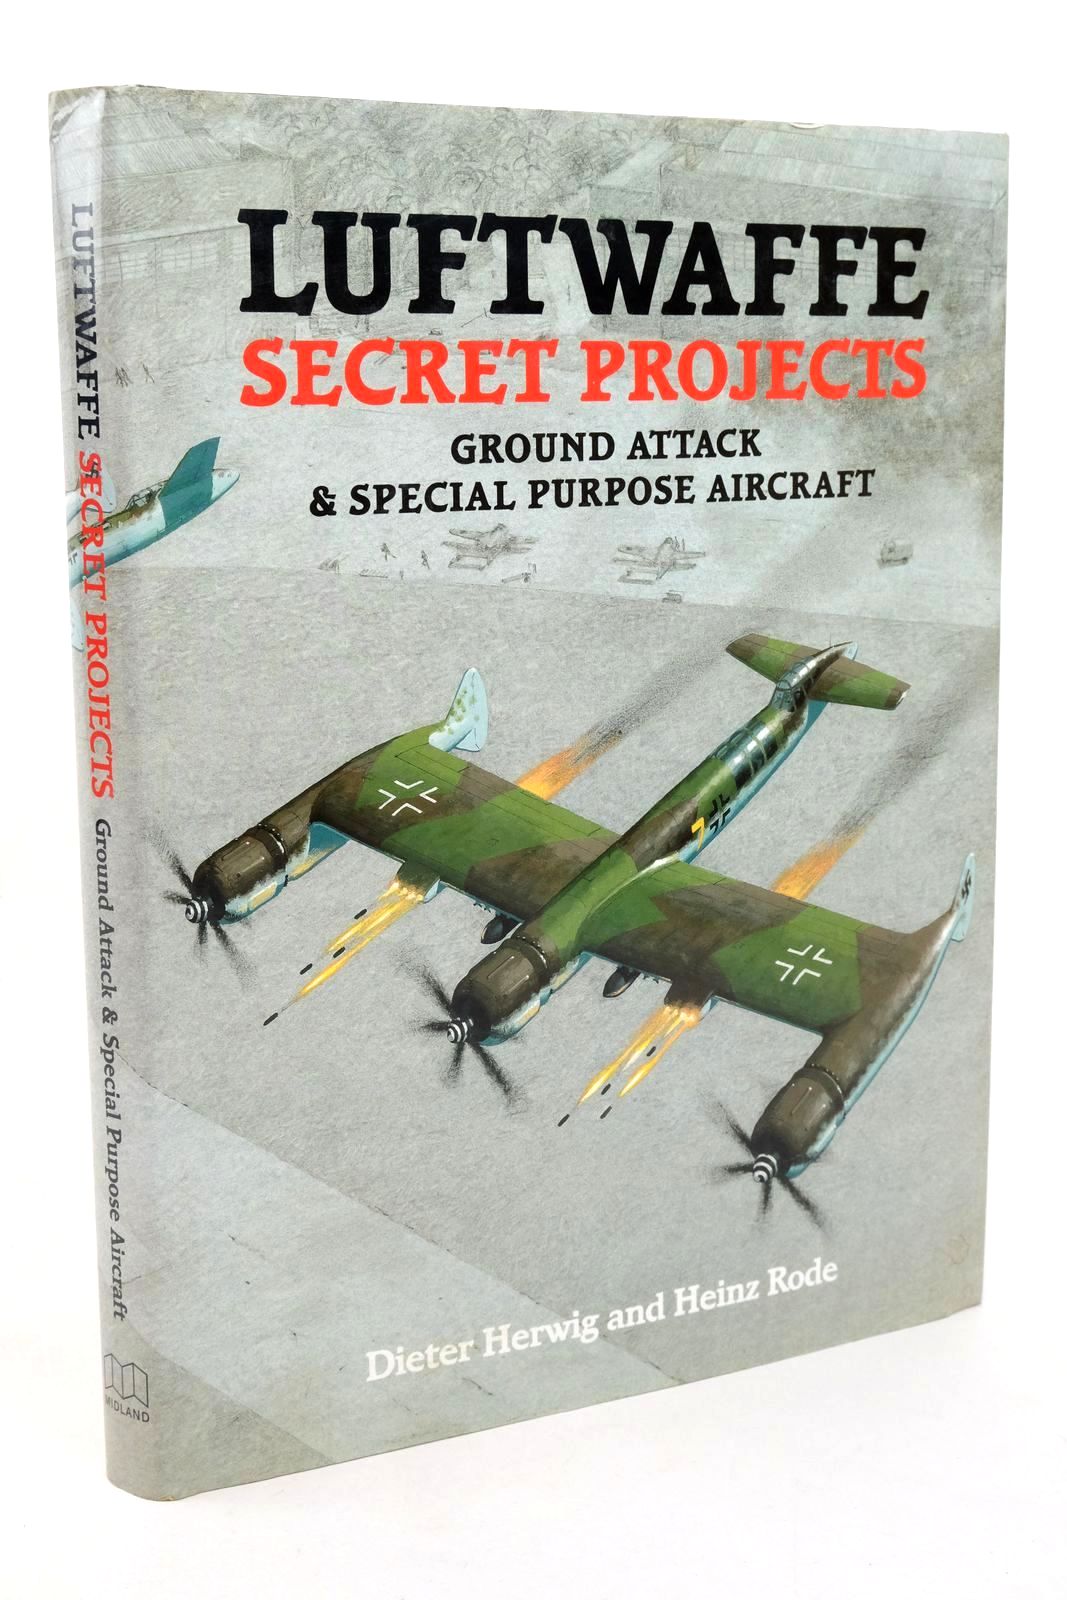 Photo of LUFTWAFFE SECRET PROJECTS GROUND ATTACK &AMP; SPECIAL PURPOSE AIRCRAFT written by Herwig, Dieter published by Midland Publishing (STOCK CODE: 1322802)  for sale by Stella & Rose's Books